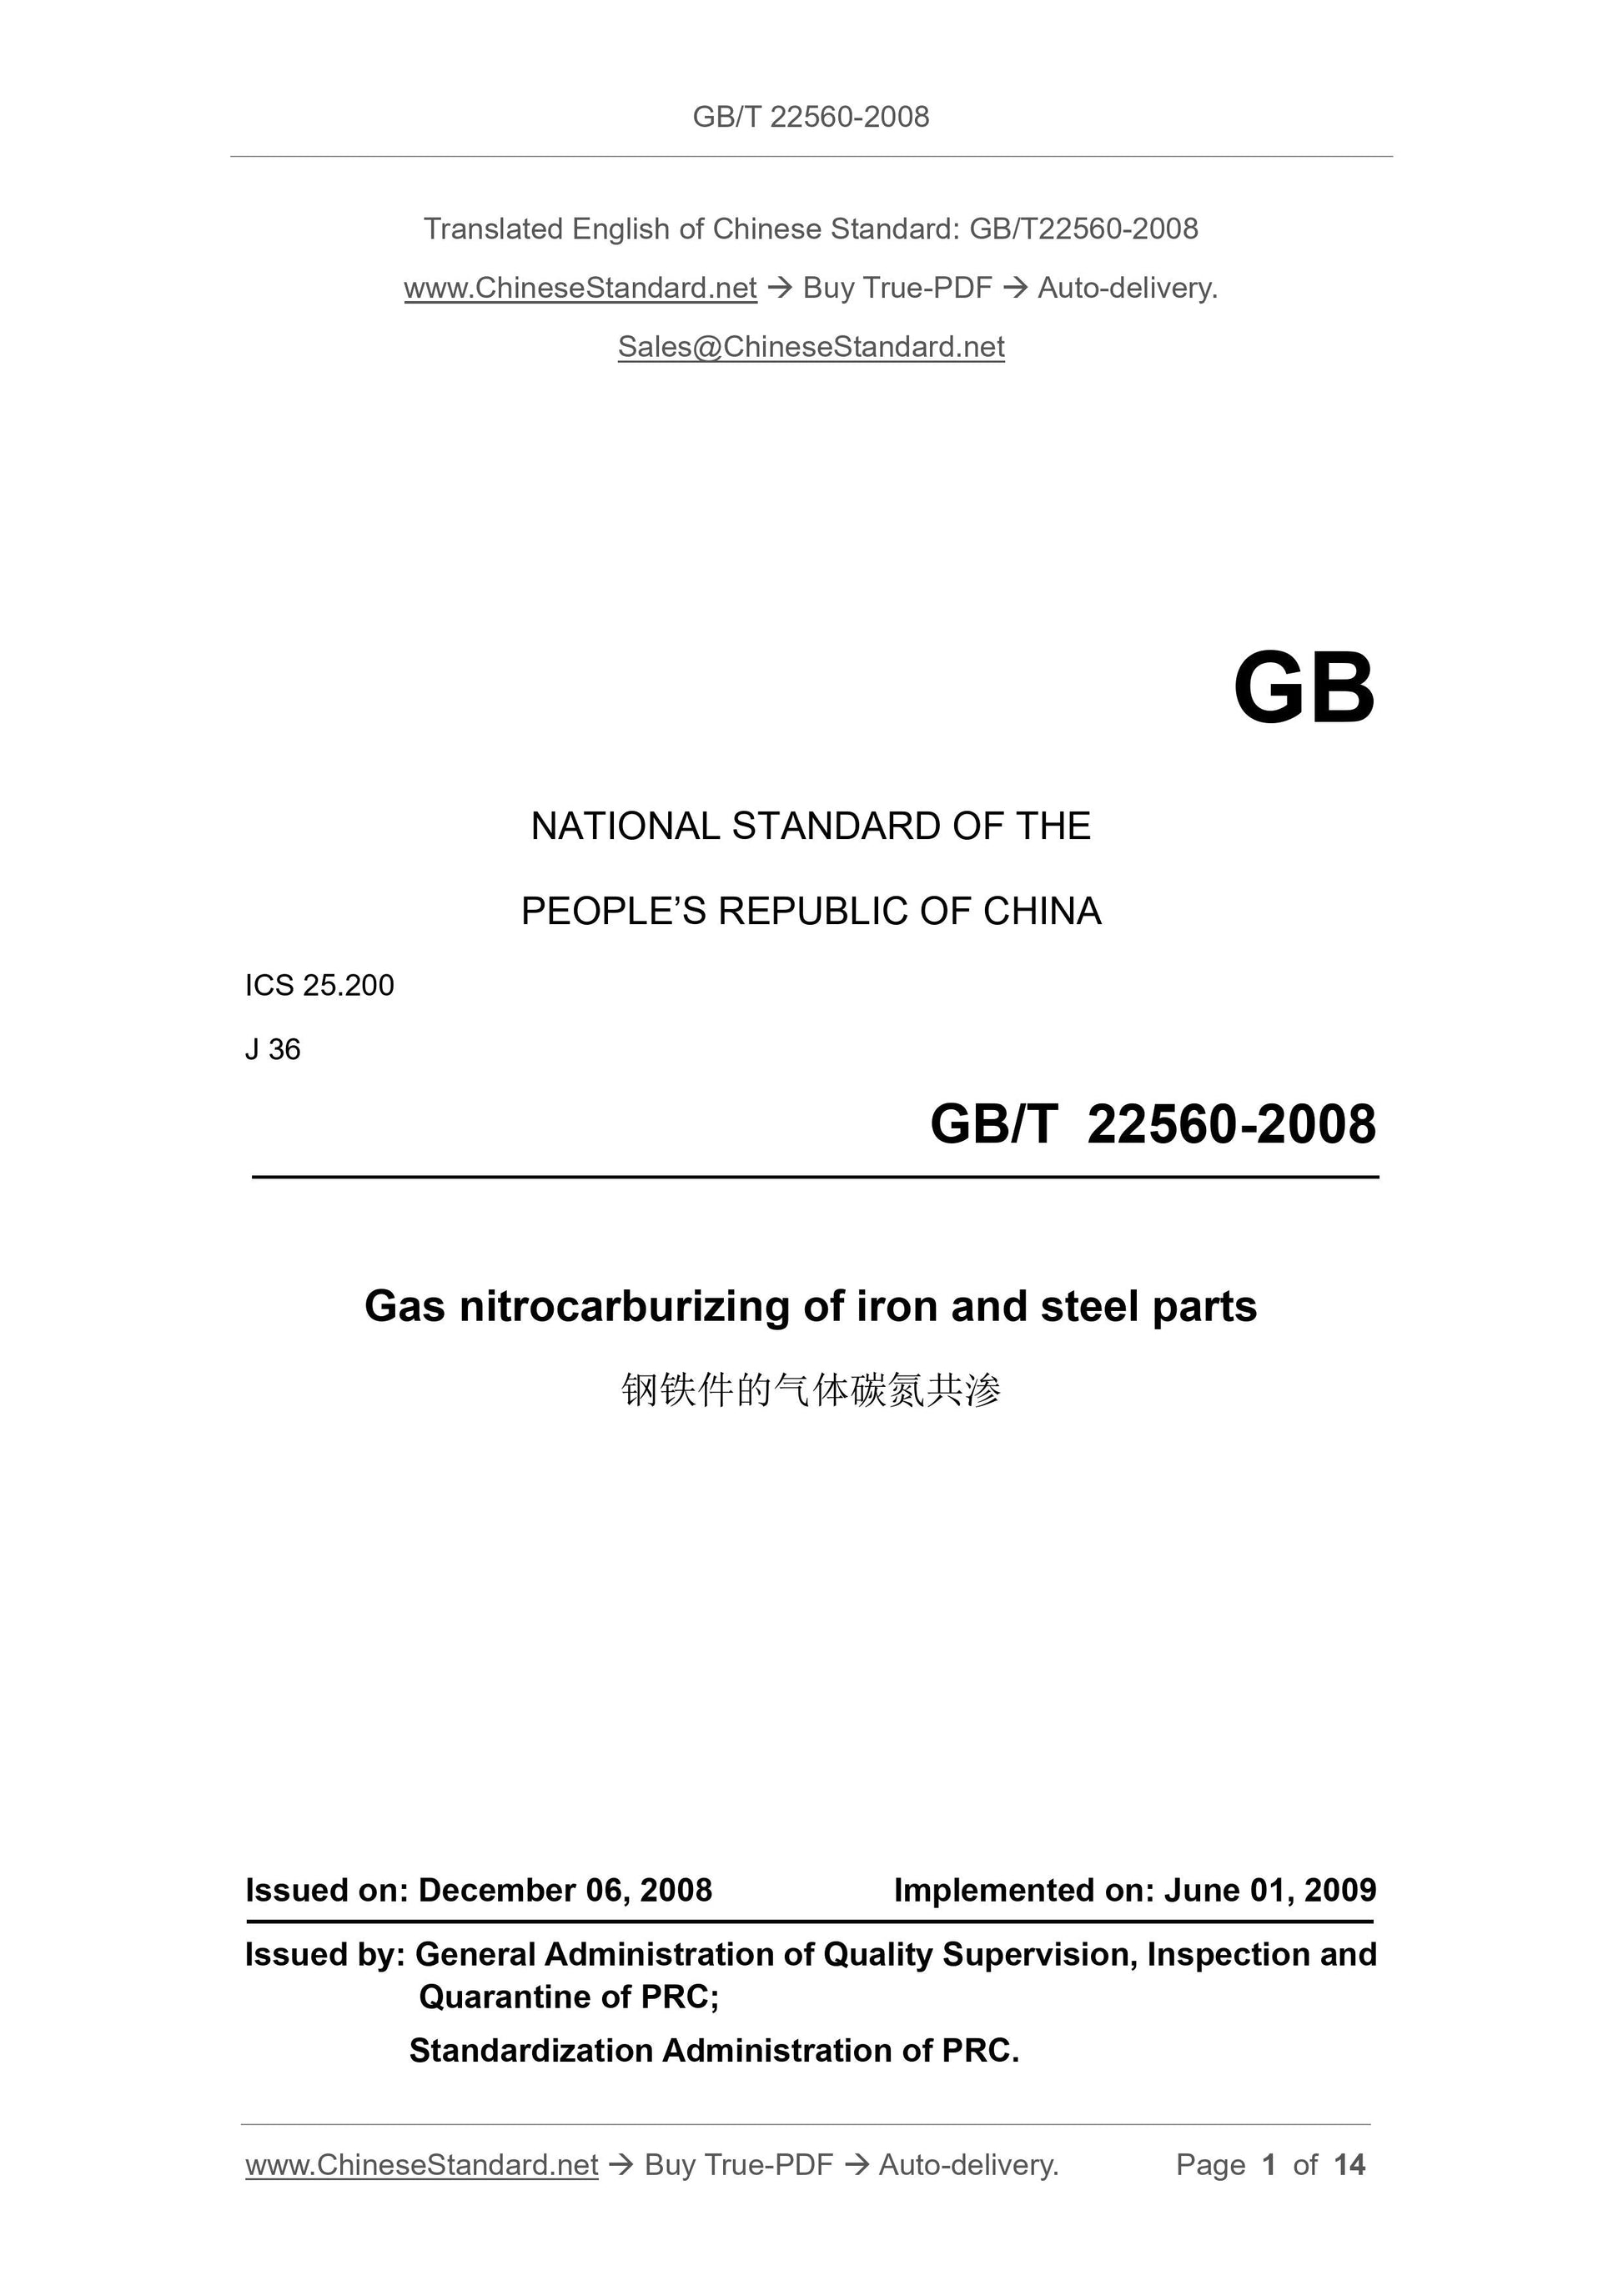 GB/T 22560-2008 Page 1